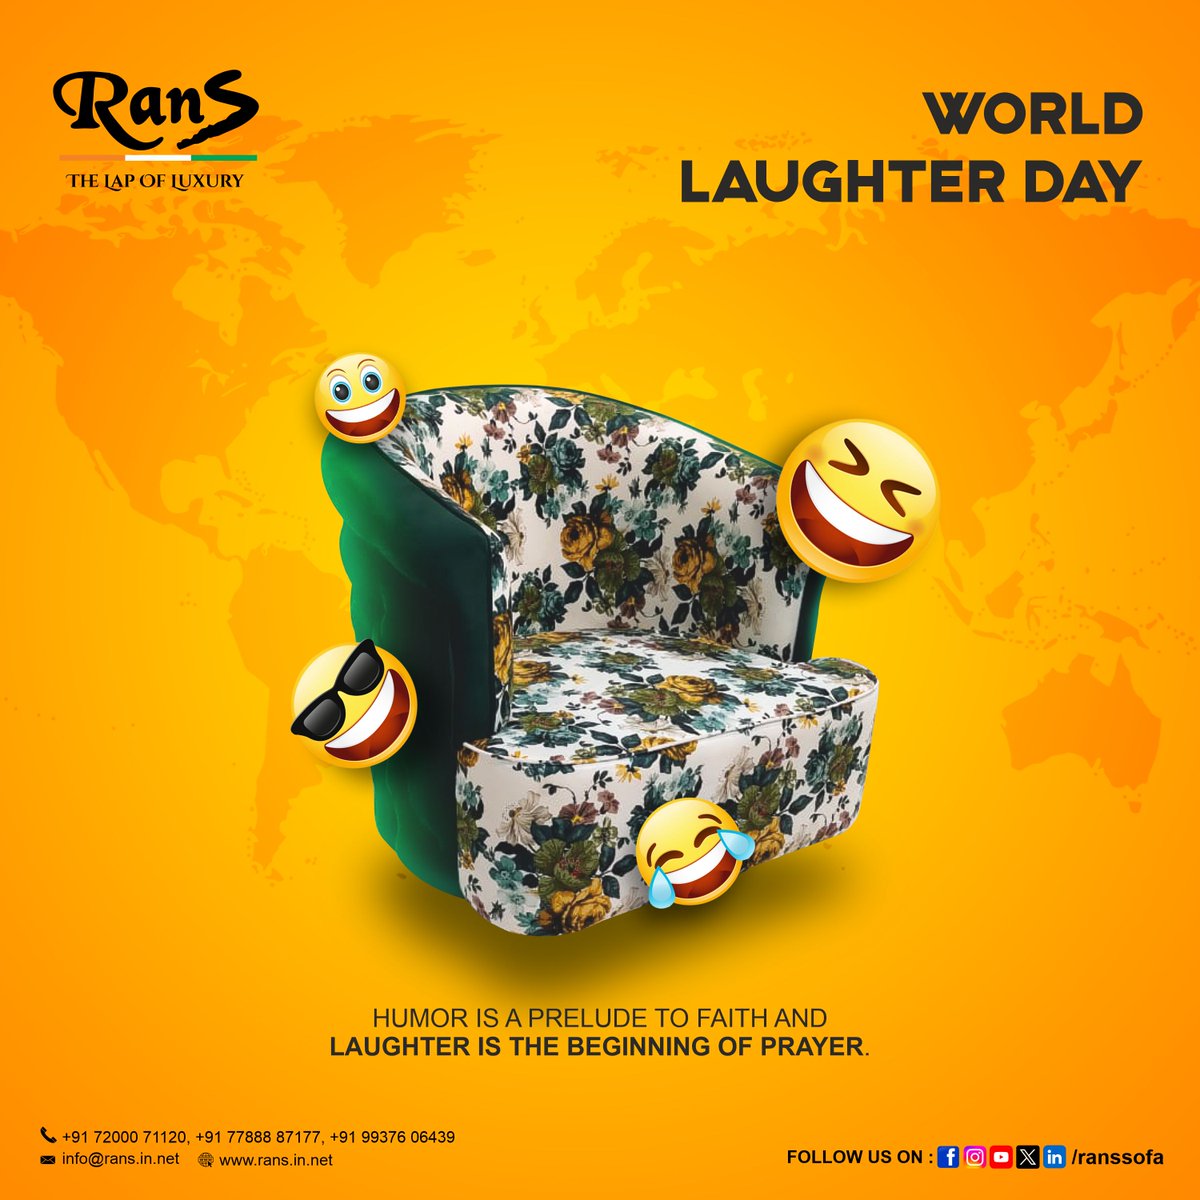 May your heart be light, your laughter contagious, and your day filled with moments that make you smile. Happy World Laughter Day!😄

#Rans #LaughterDay #WorldLaughterDay #LaughterDay2024 #SpreadLaugh #SpreadHappiness